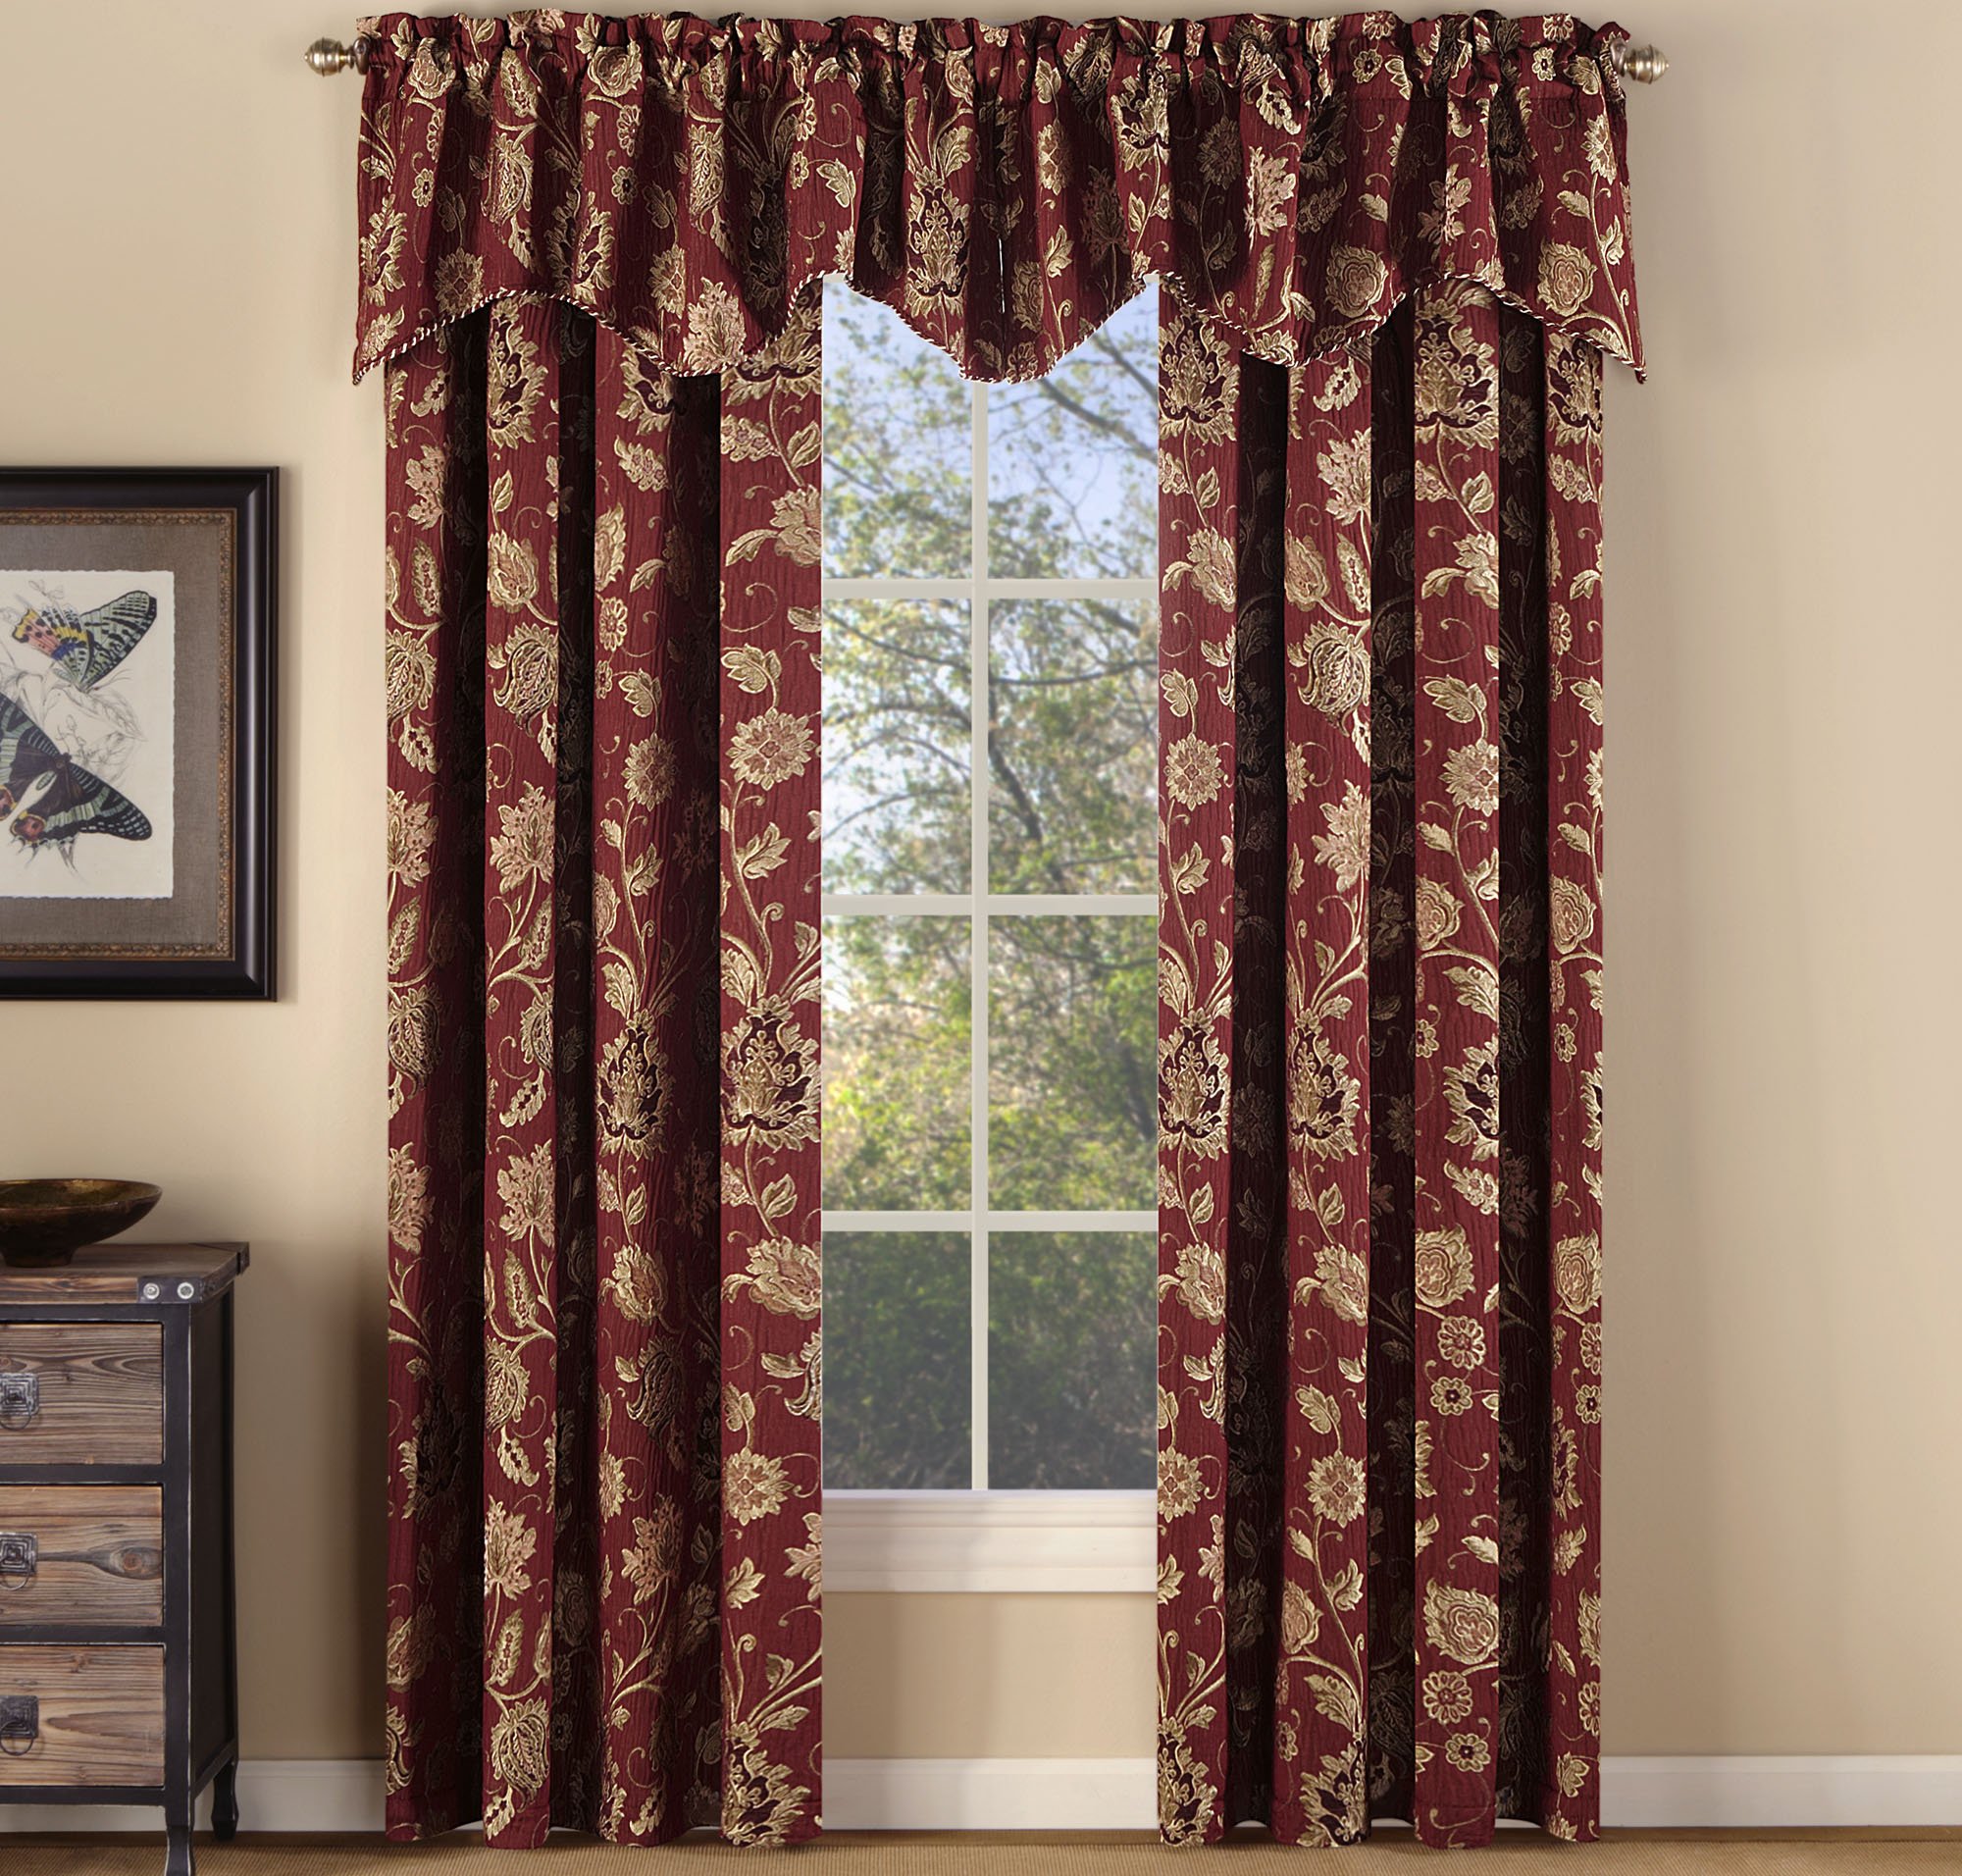 burgundy curtains for living room 02